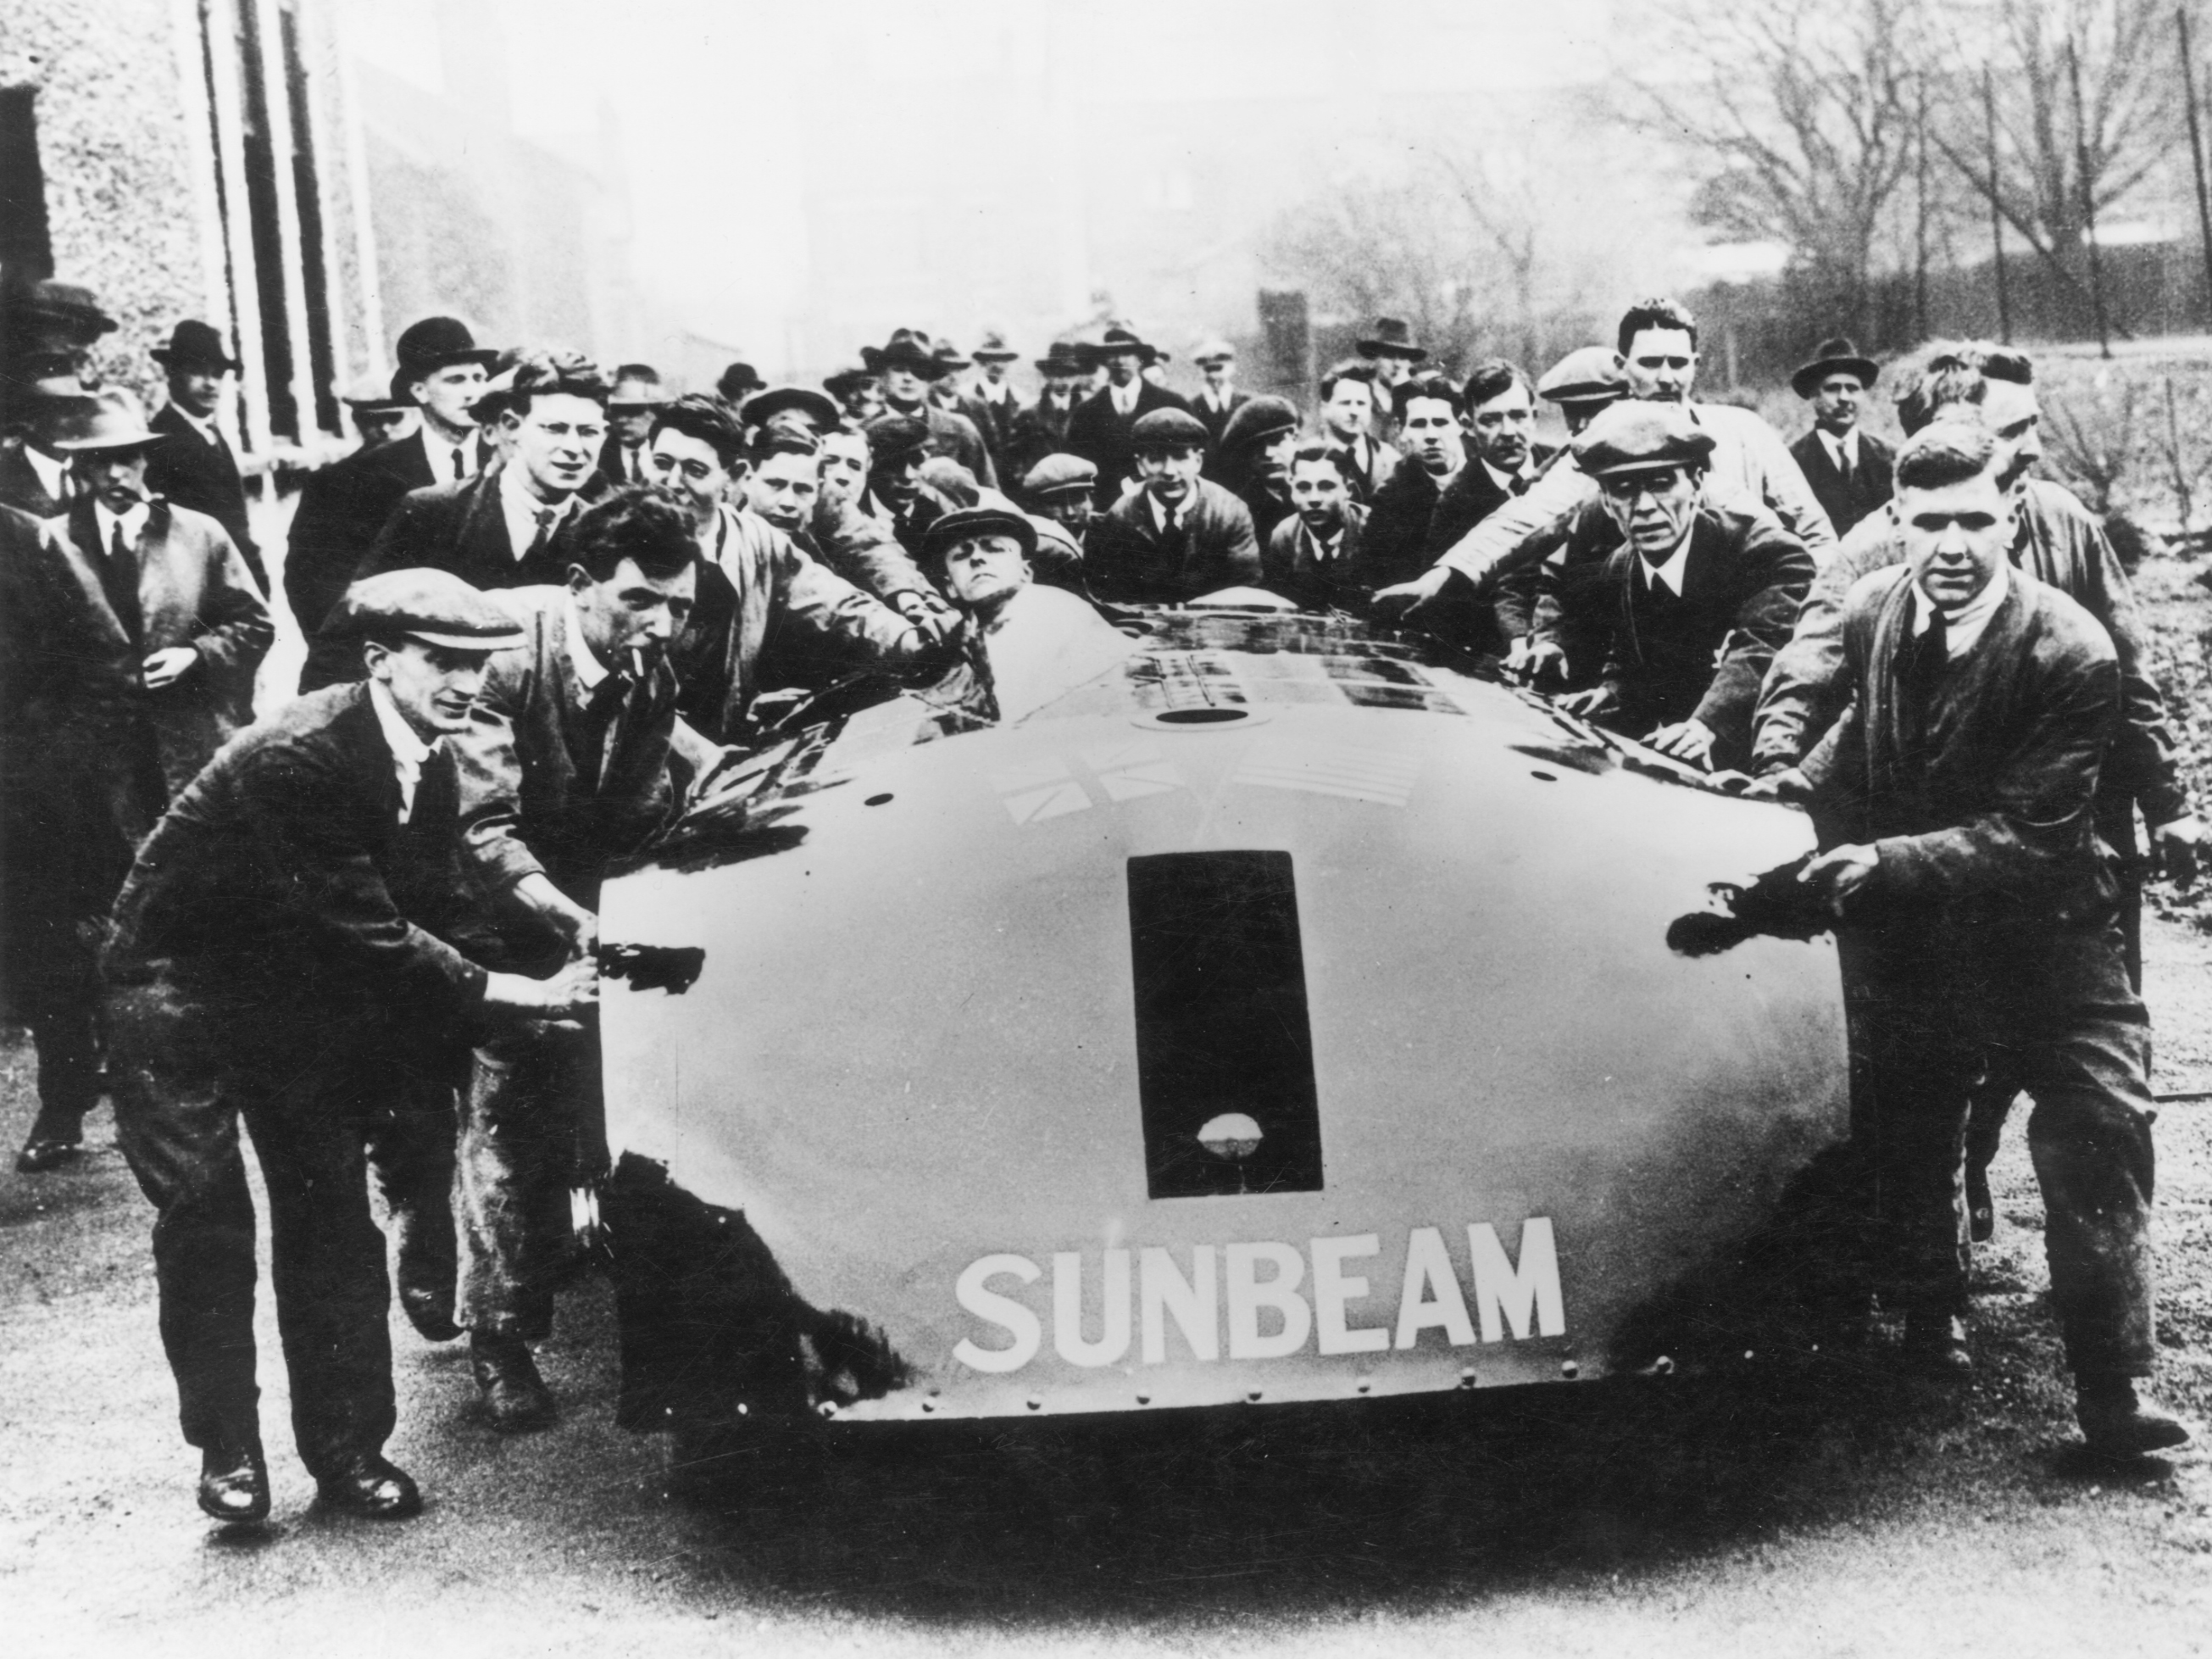 Workers at the Sunbeam factory in Wolverhampton push out their mighty creation